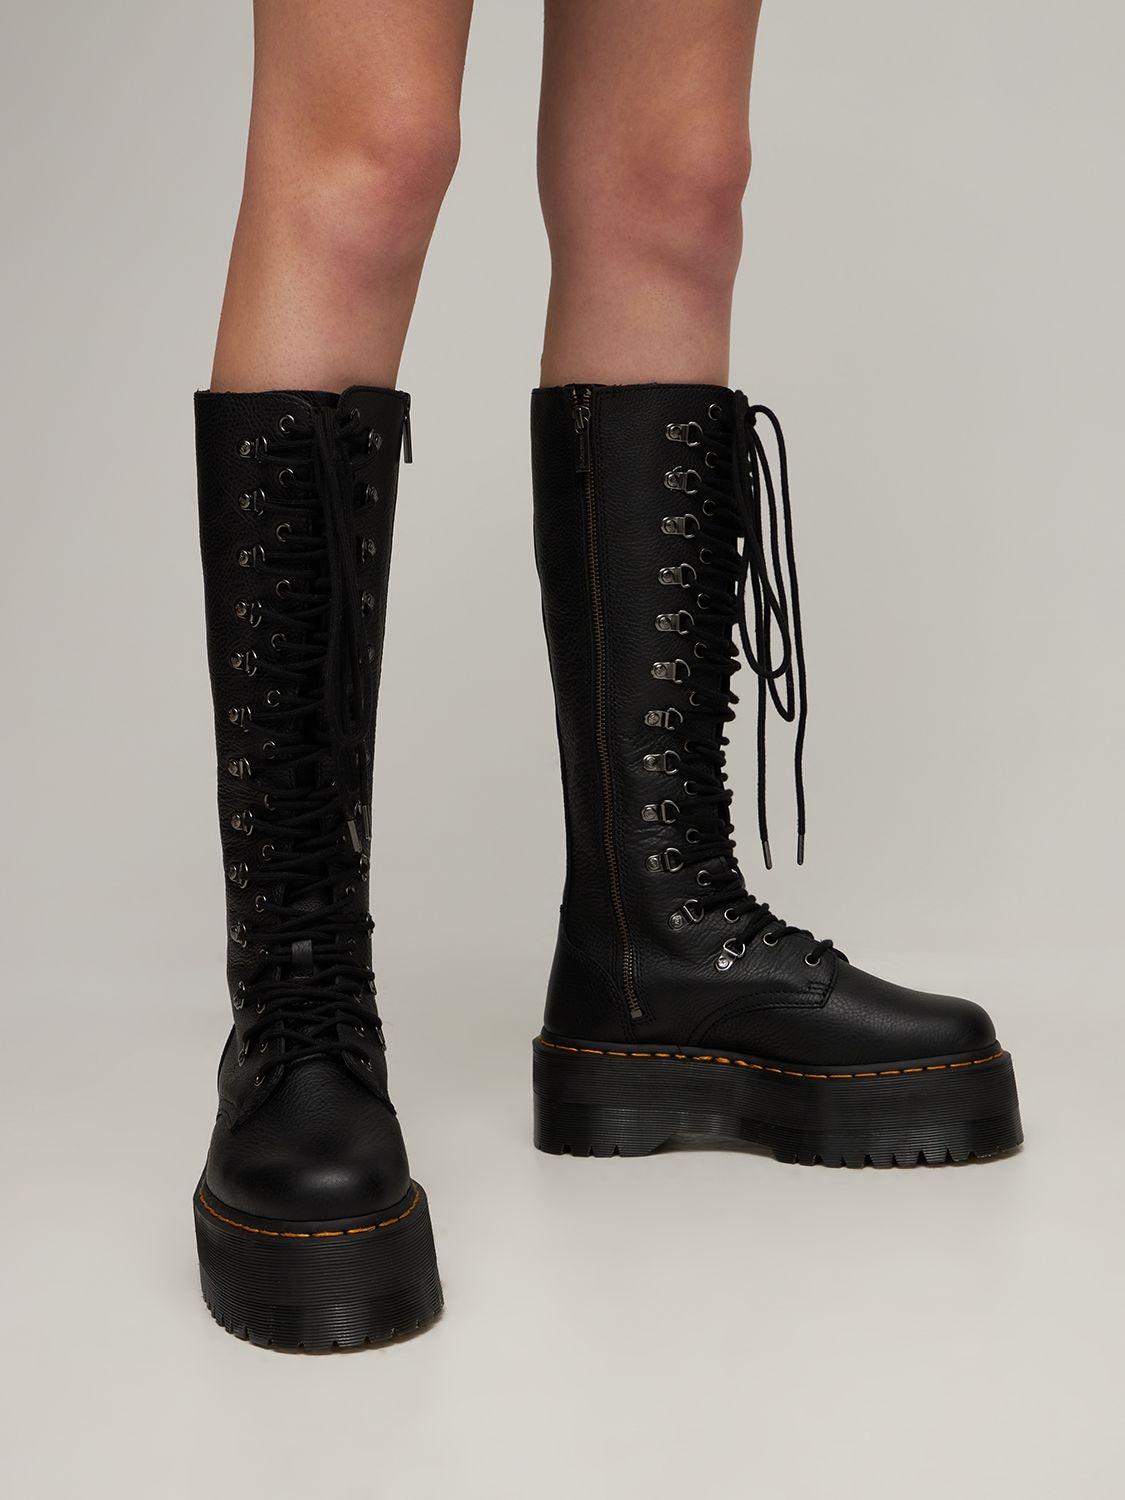 Dr. Martens 60mm 1b60 Max Leather Tall Boots in Black | Lyst Canada